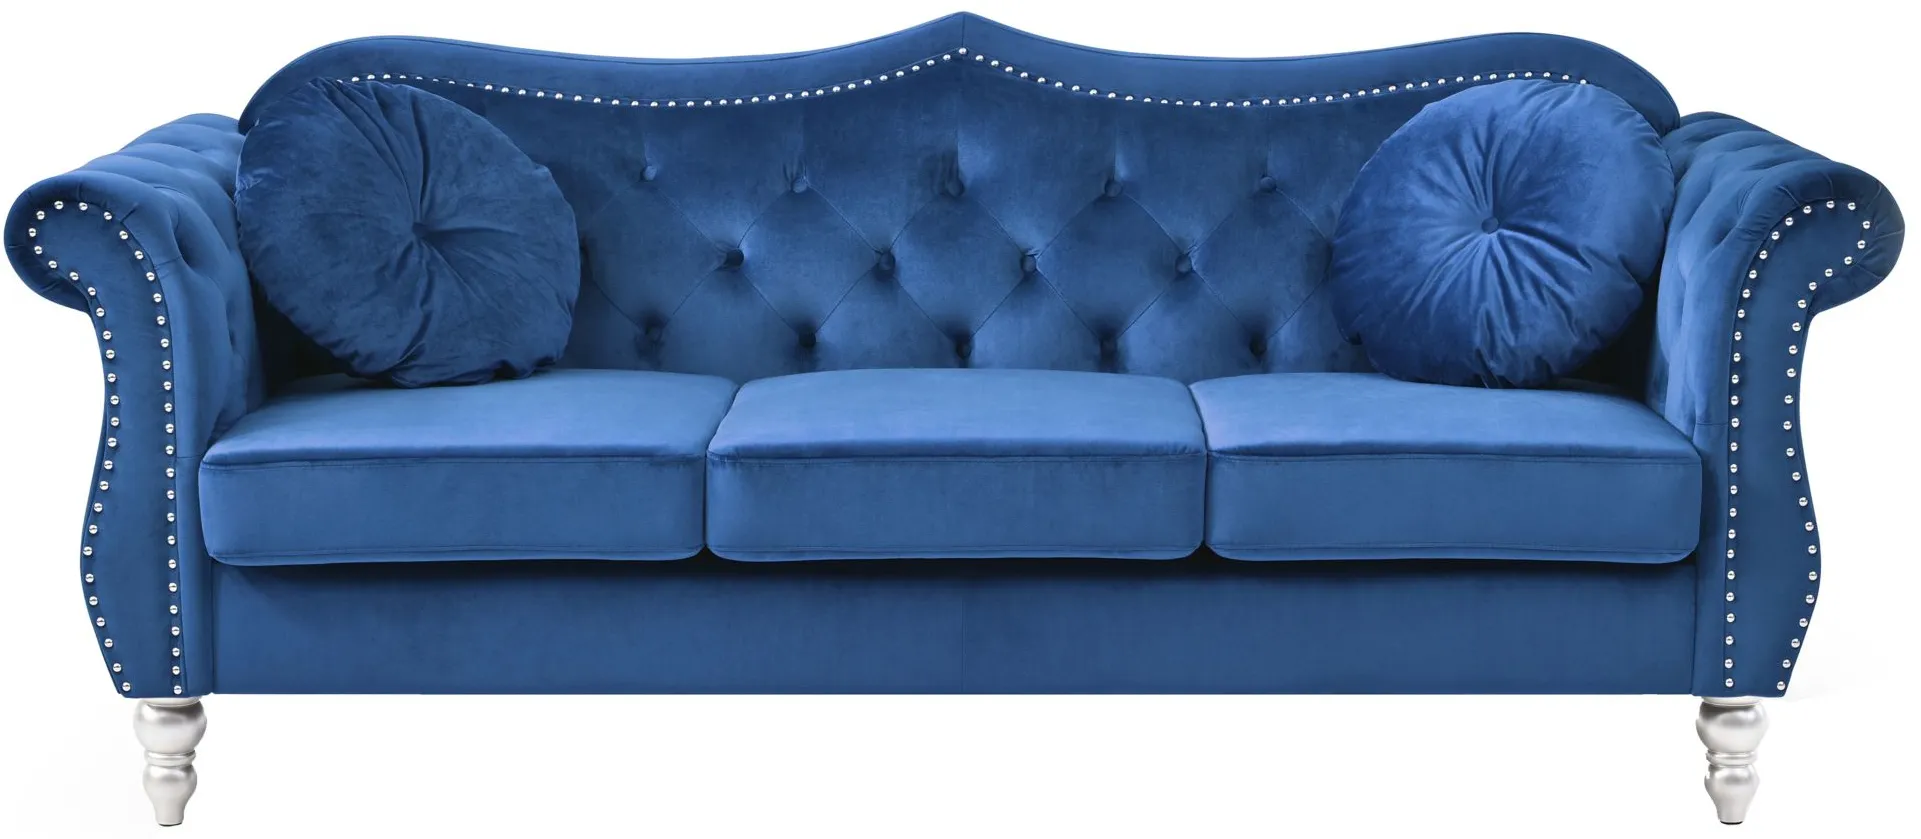 Hollywood Sofa in Navy Blue by Glory Furniture